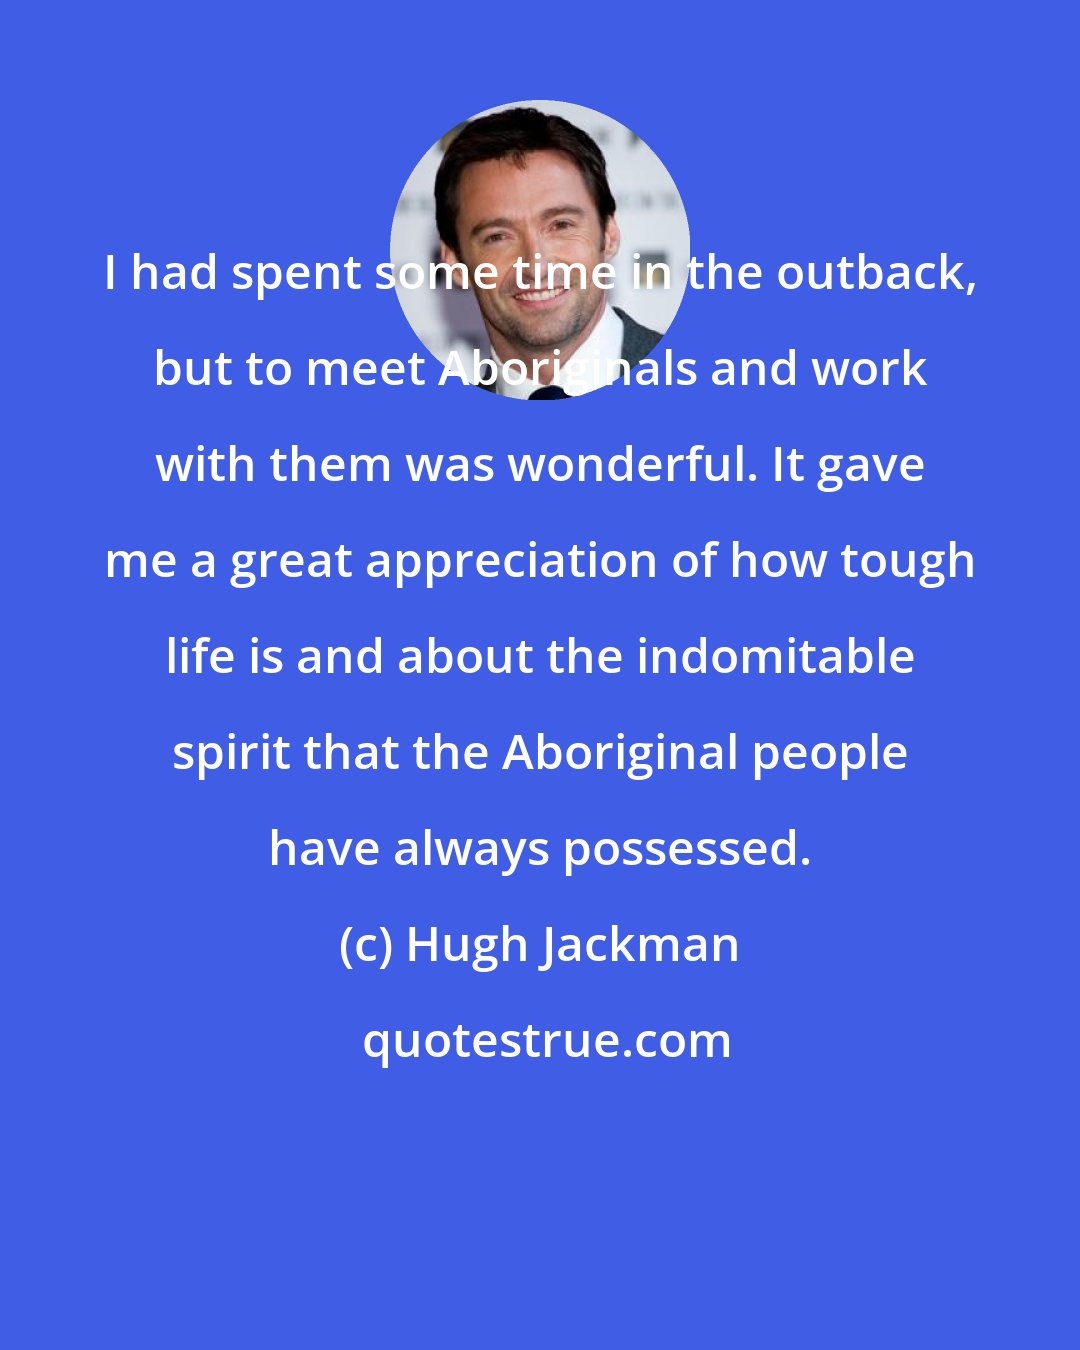 Hugh Jackman: I had spent some time in the outback, but to meet Aboriginals and work with them was wonderful. It gave me a great appreciation of how tough life is and about the indomitable spirit that the Aboriginal people have always possessed.